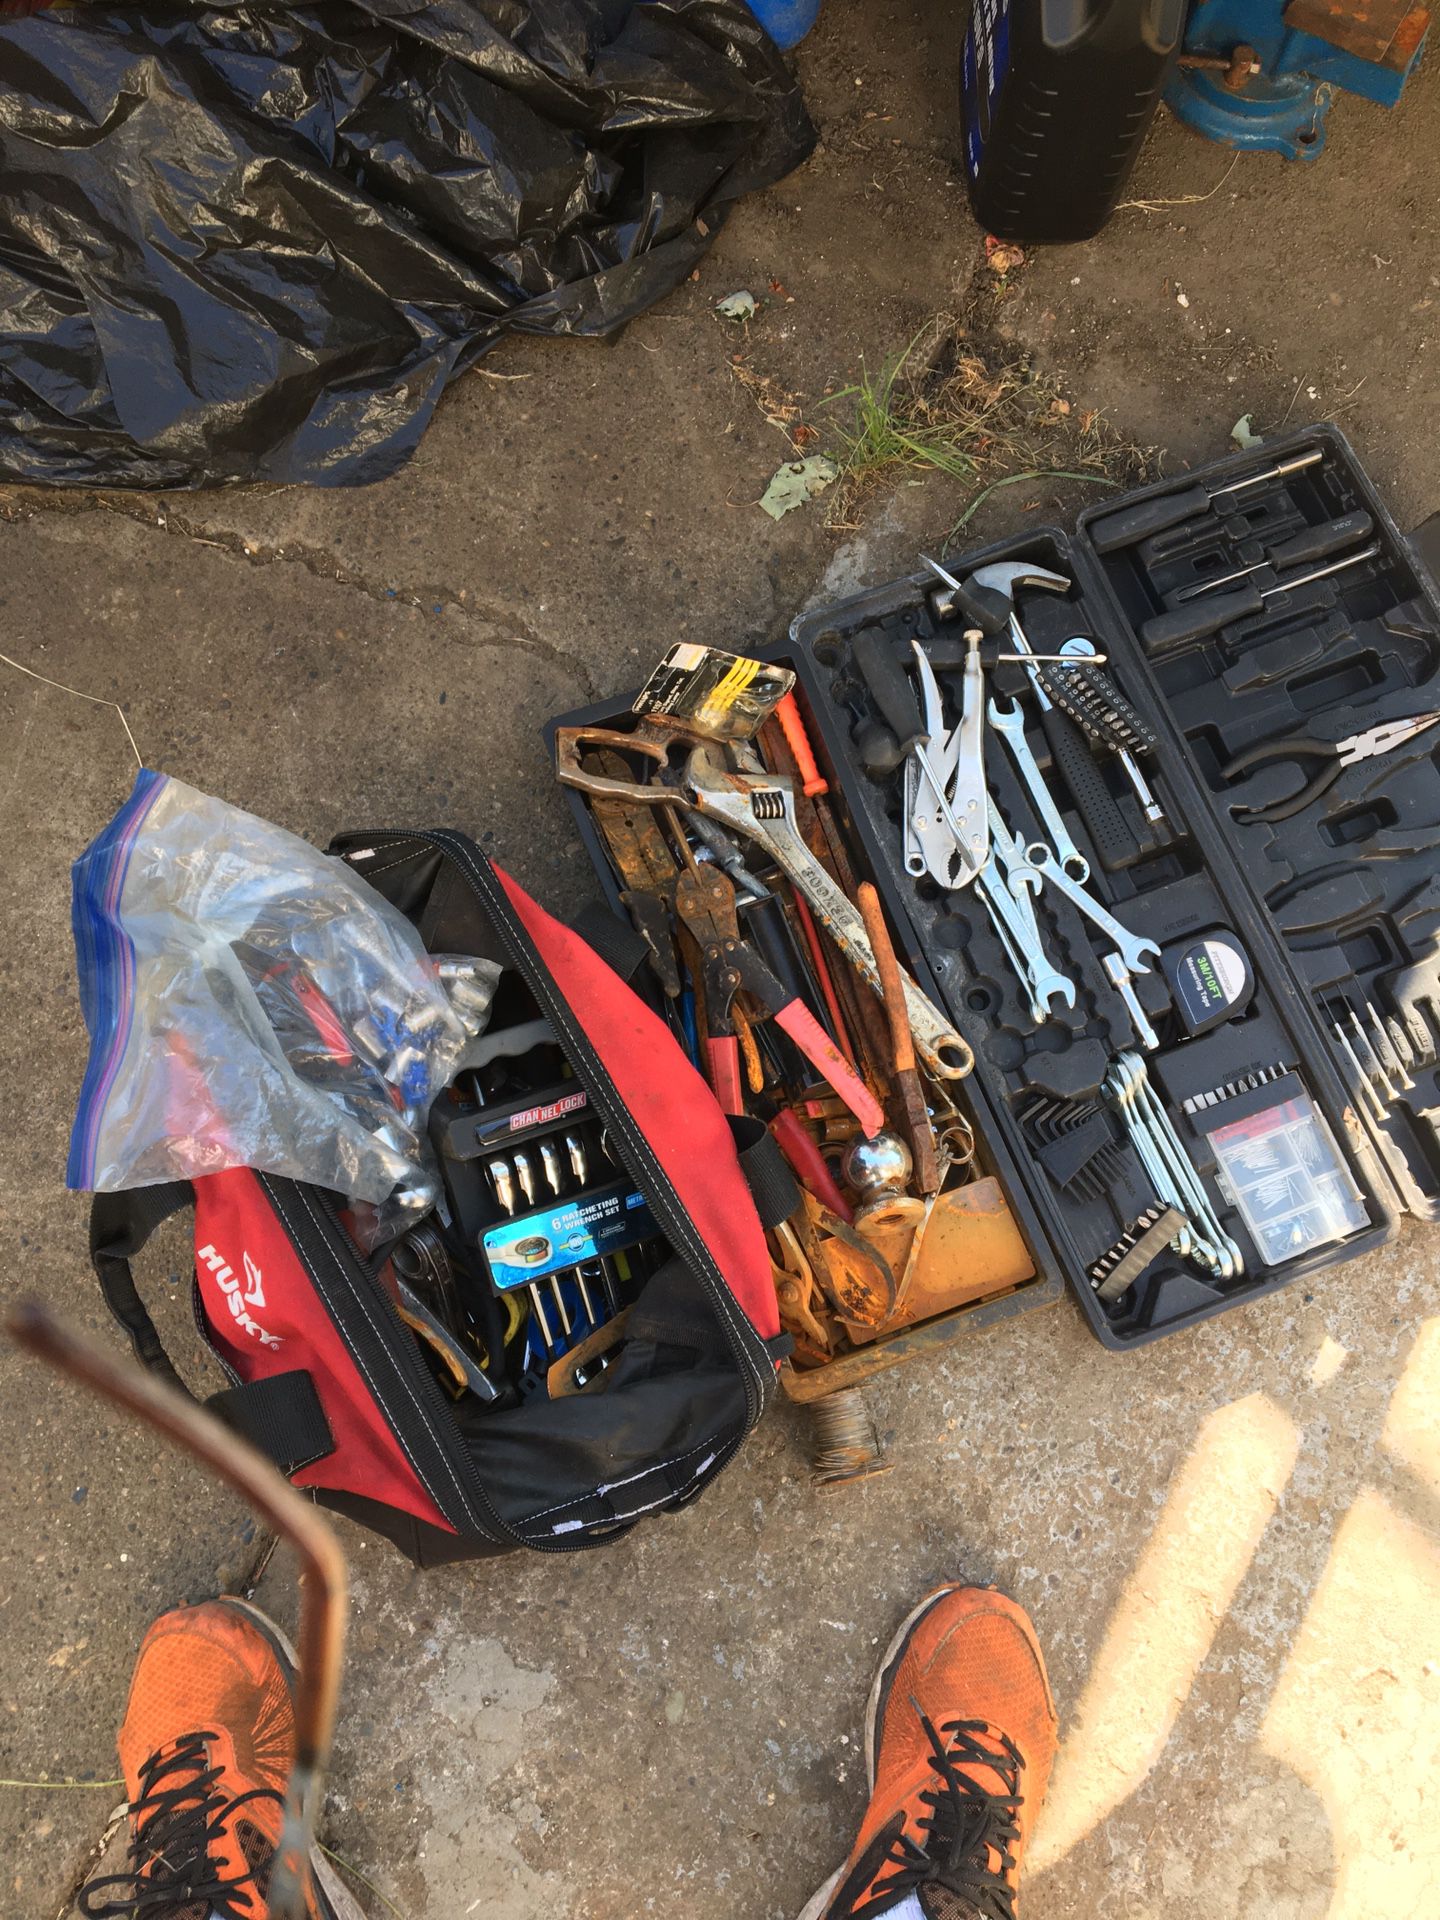 Bag with all tools pictured